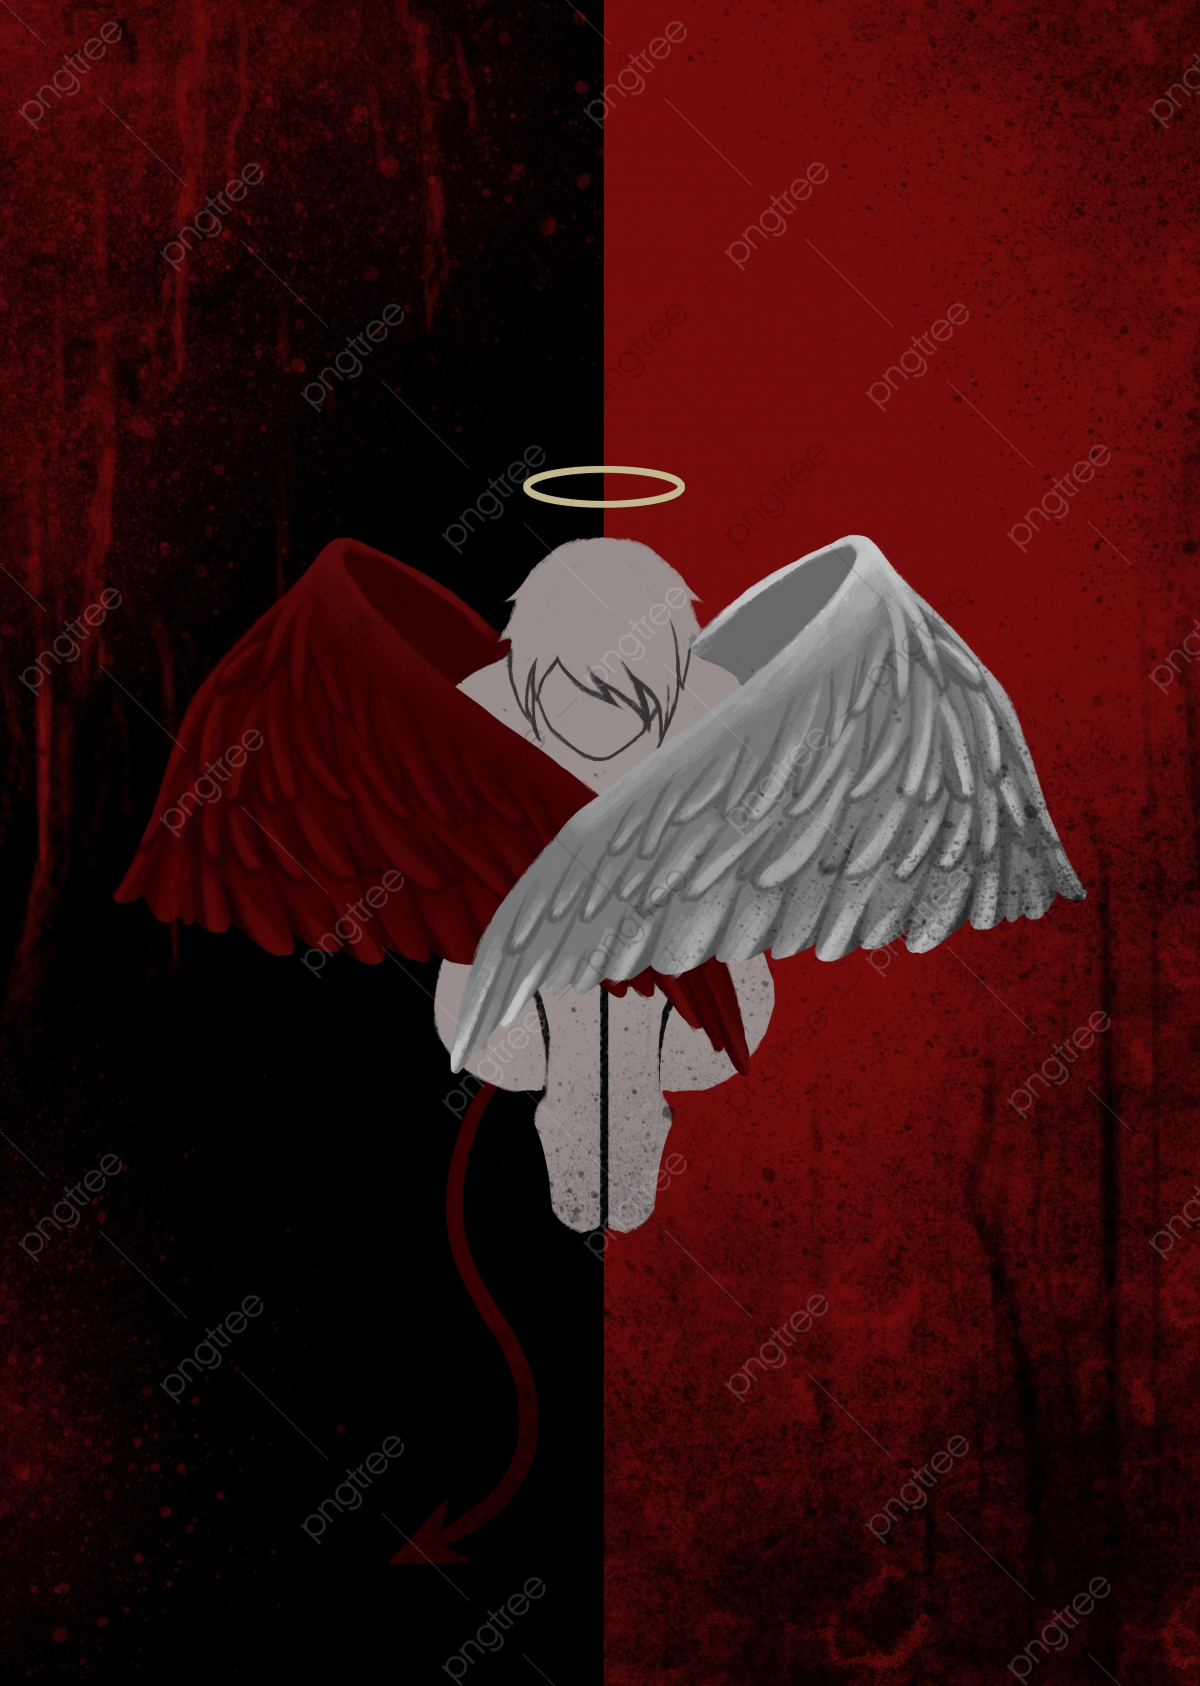 Bloodship Angel Devil Background, Blood Stains, Girl, Wing Background Image for Free Download